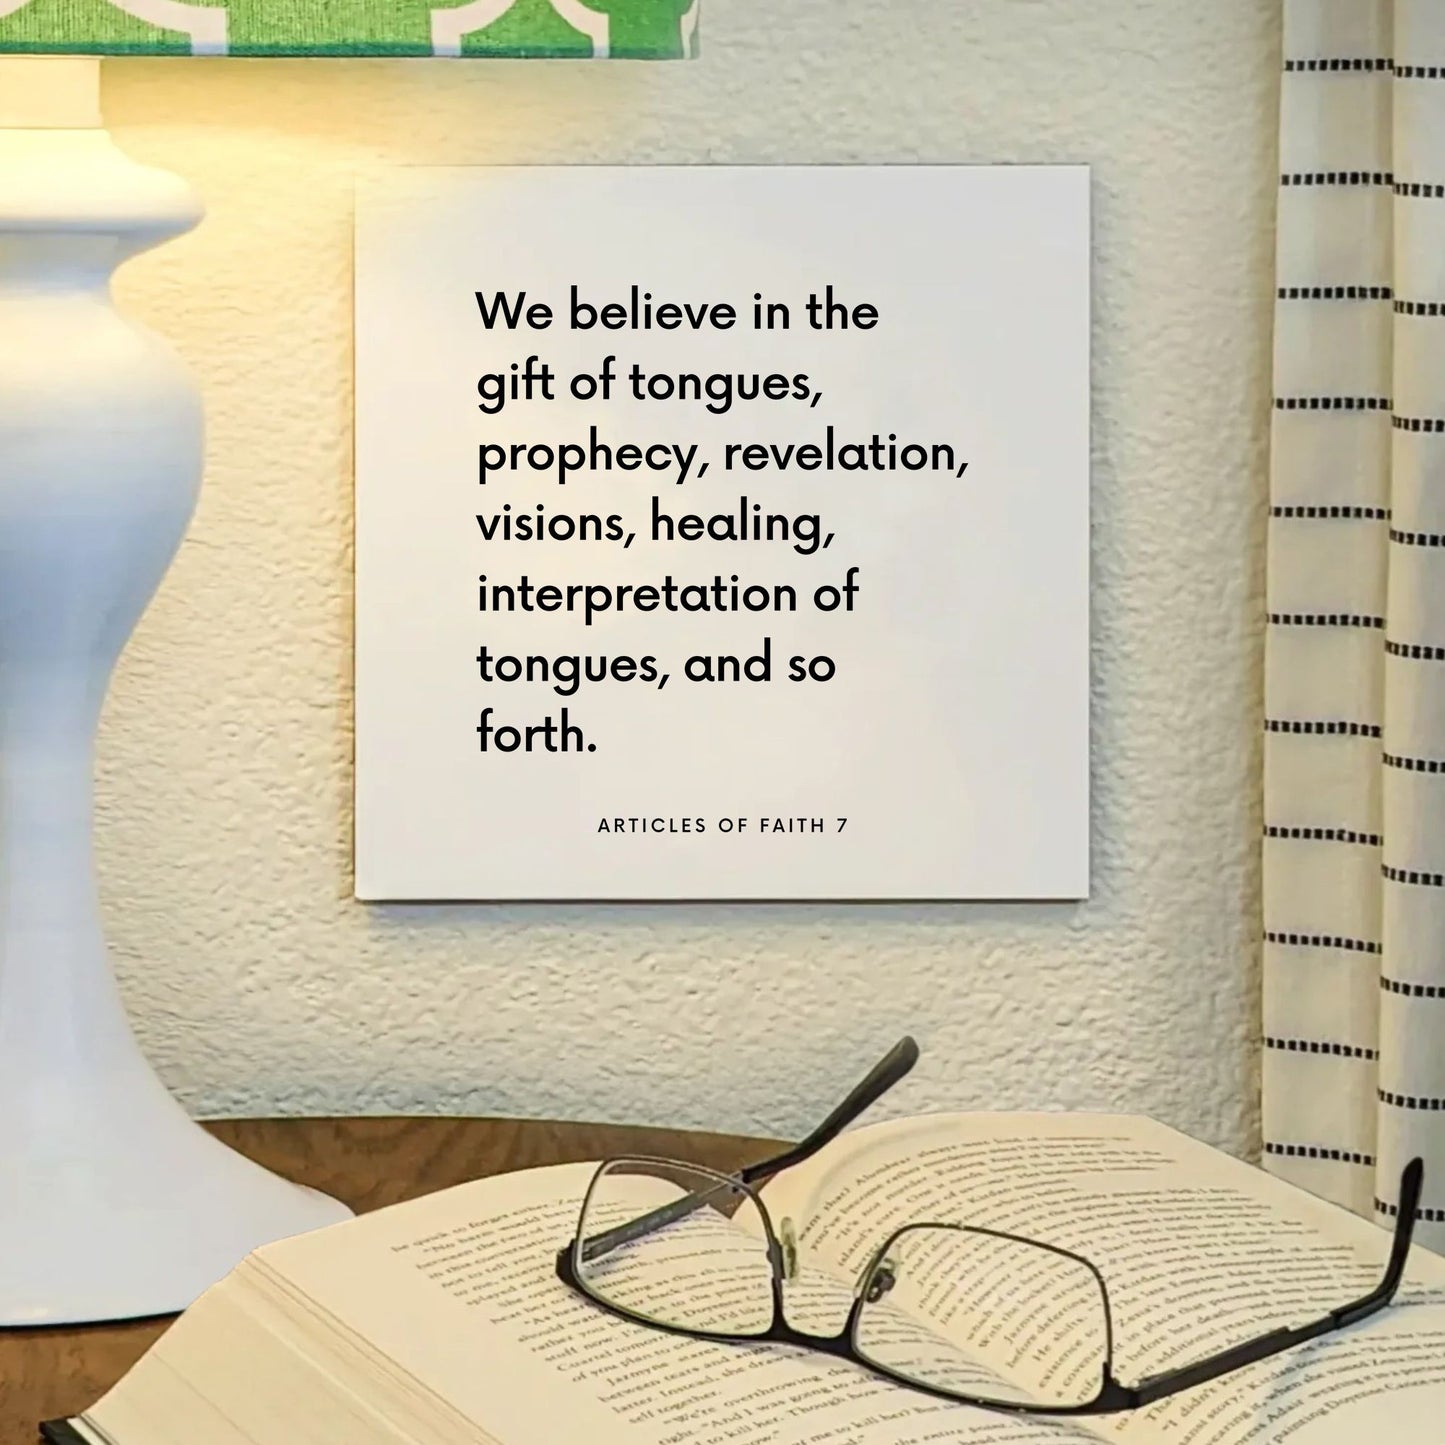 Lamp mouting of the scripture tile for Articles of Faith 7 - "We believe in the gift of tongues, prophecy, revelation"